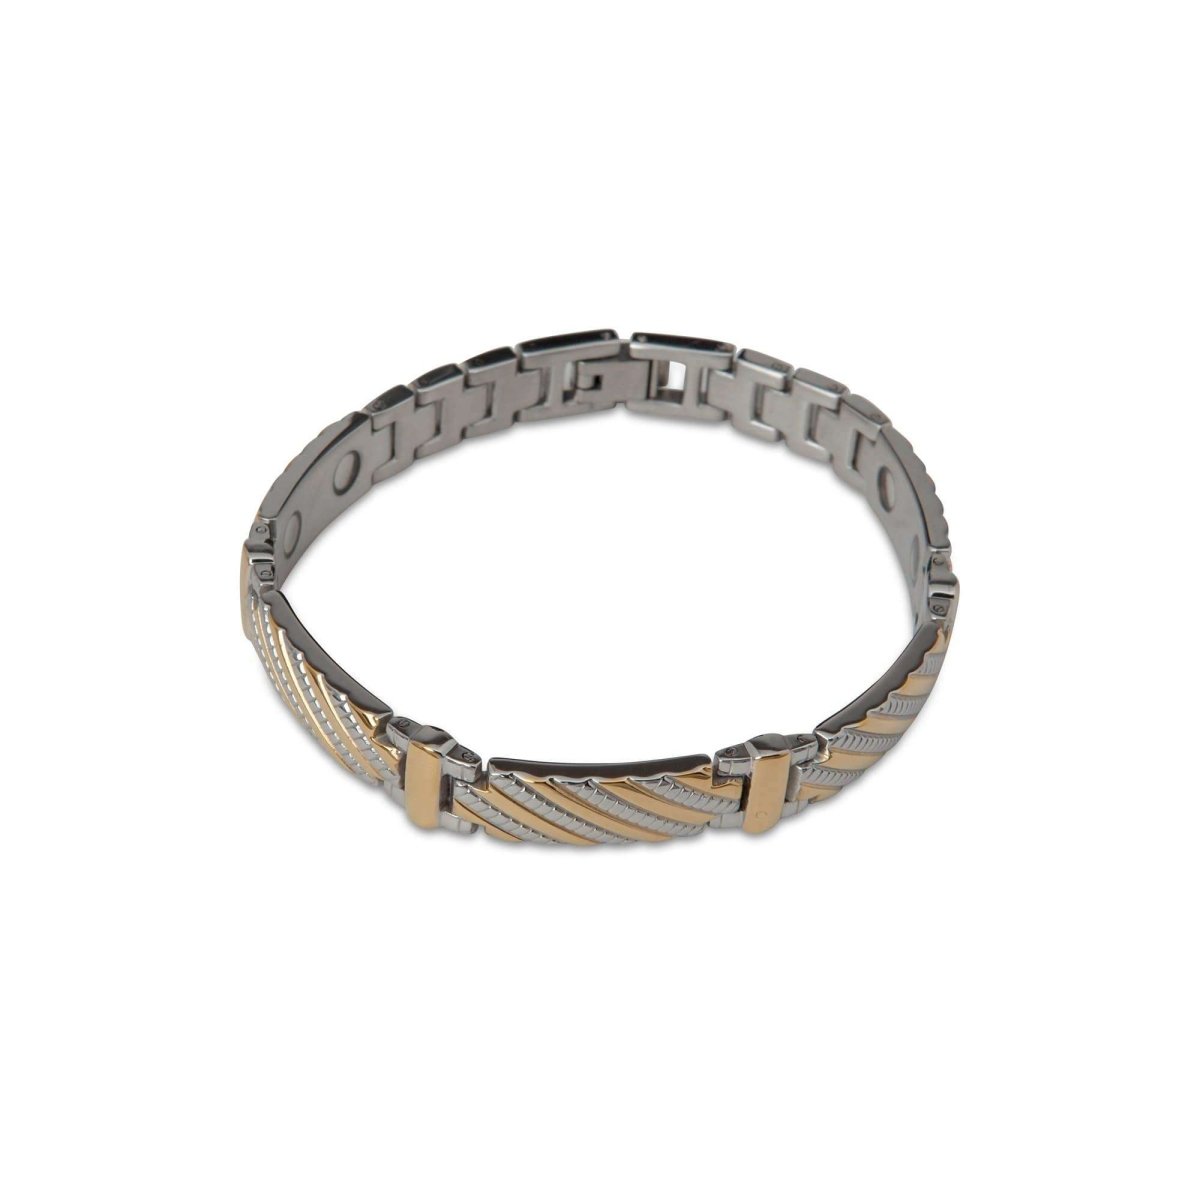 Gold and Textured Silver Striped Bracelet - MenSuits